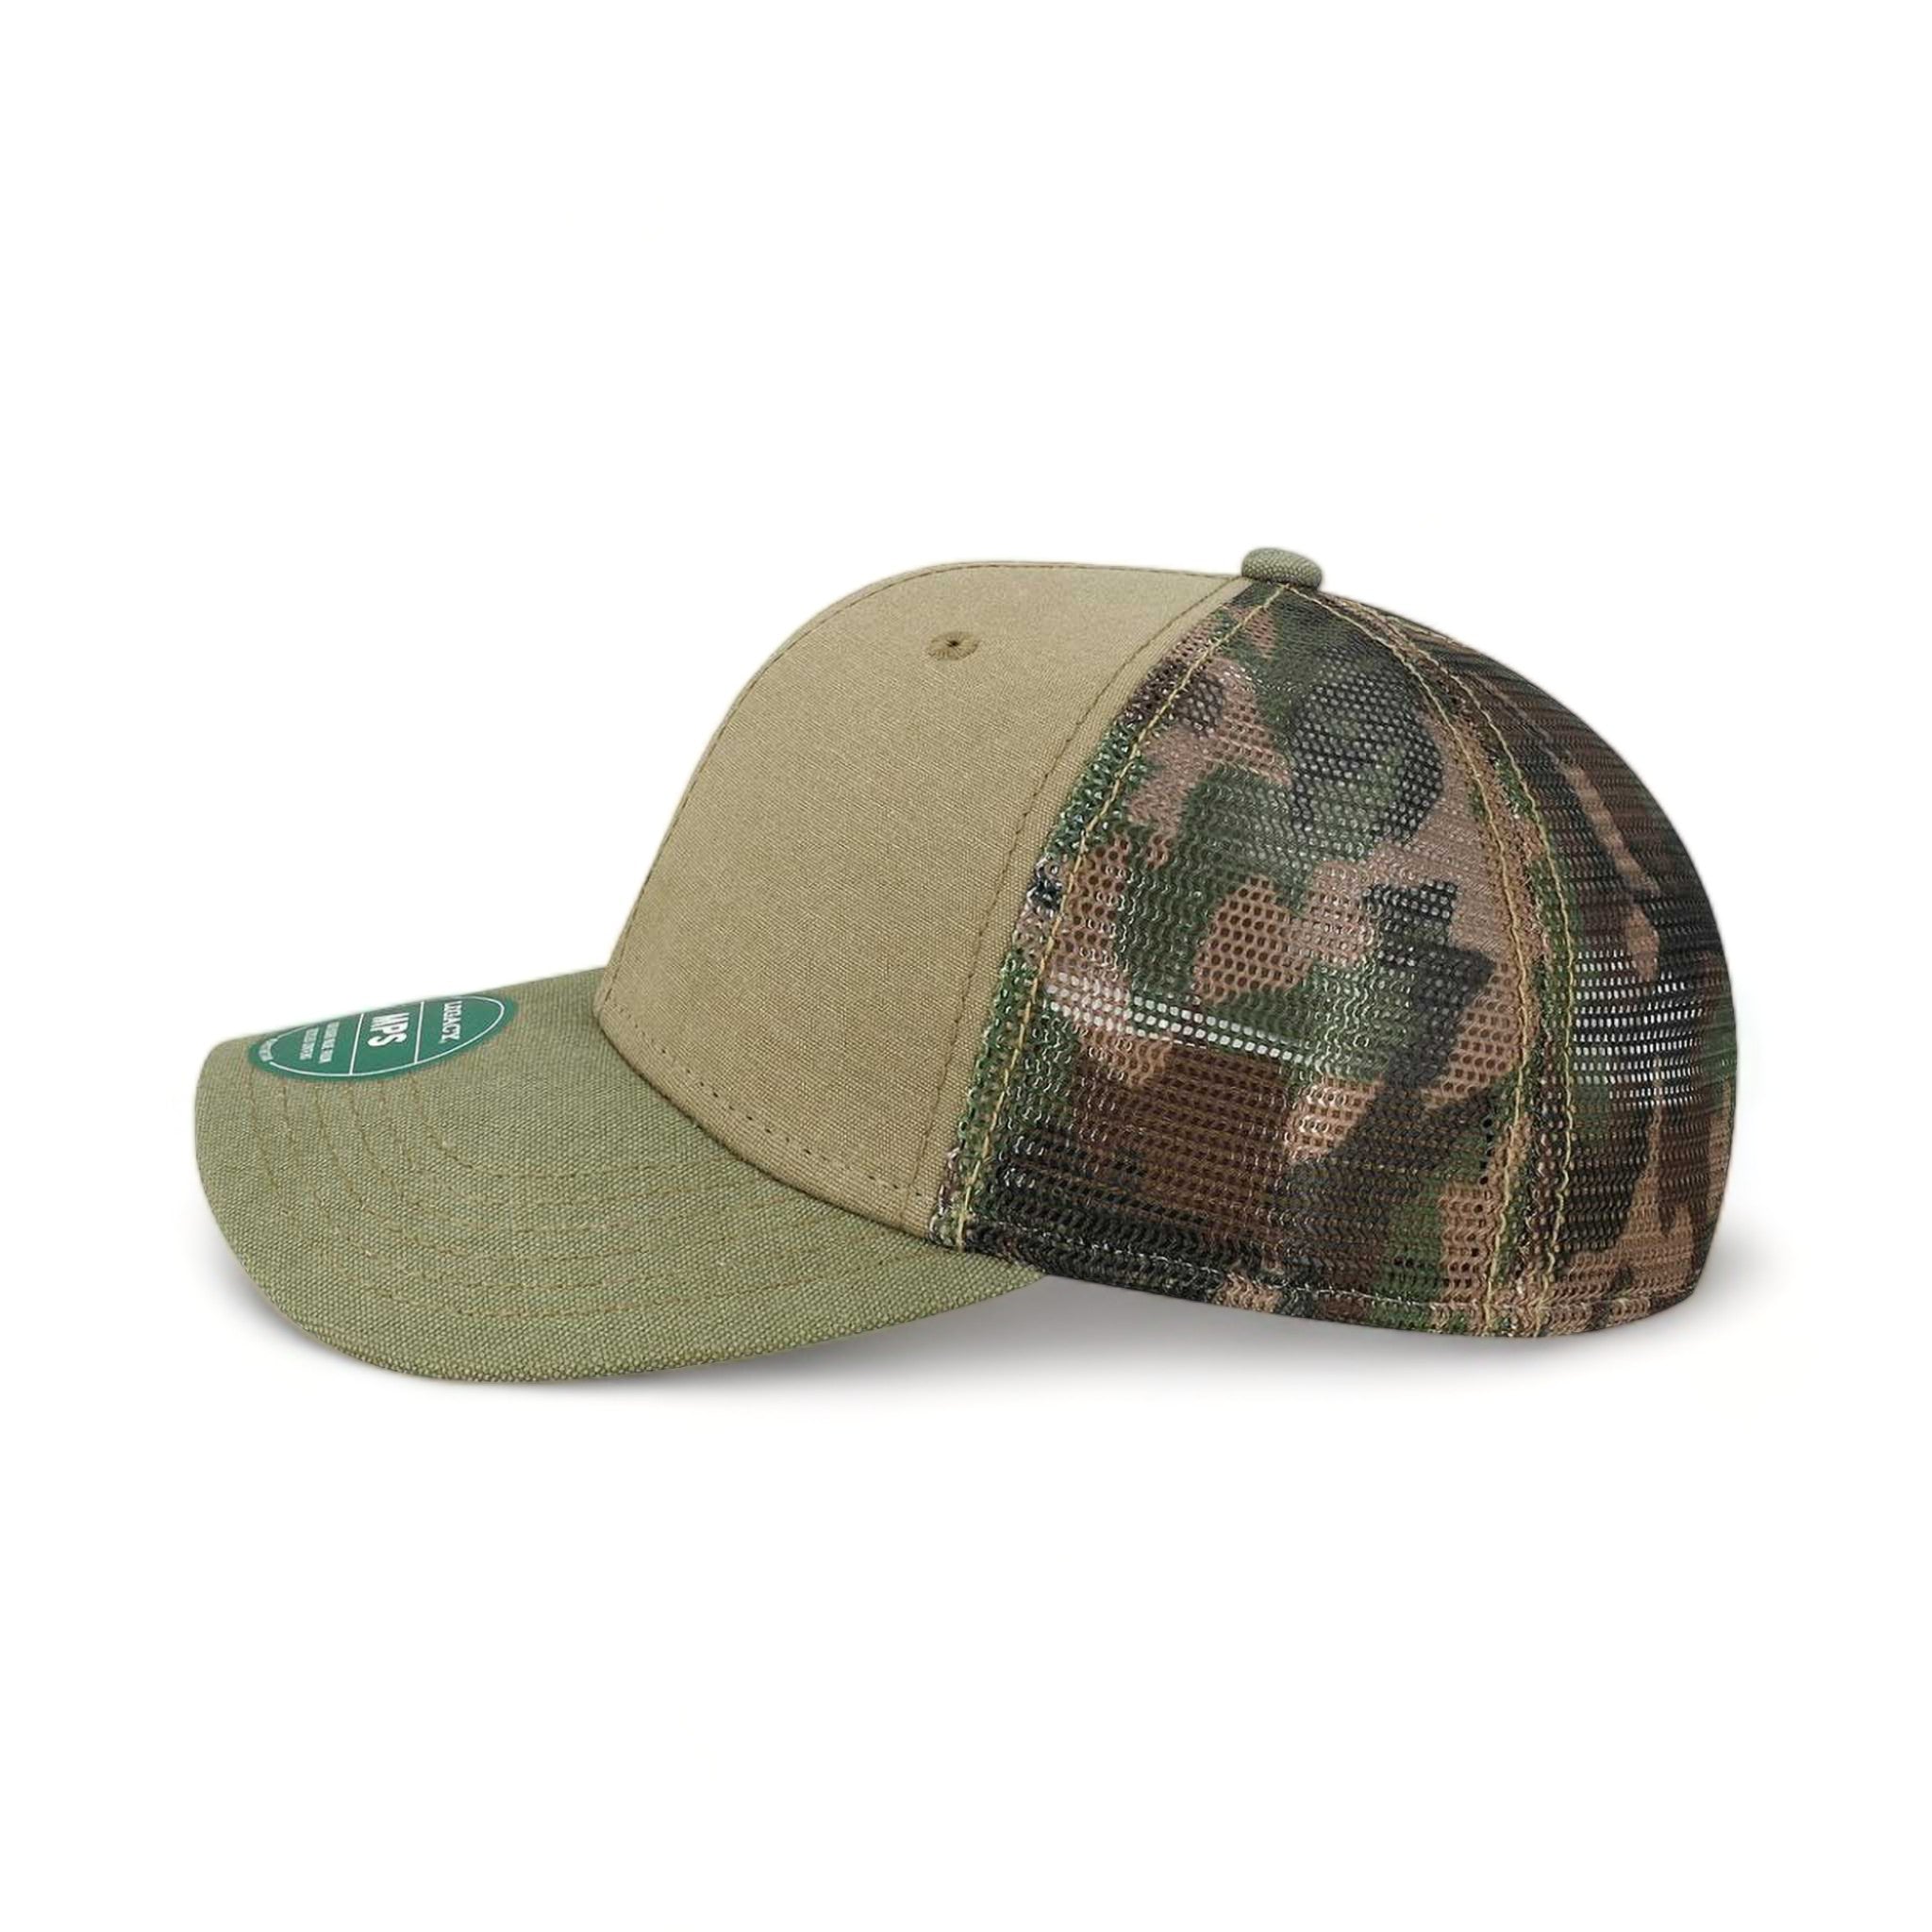 Side view of LEGACY MPS custom hat in khaki, sage and camo mesh